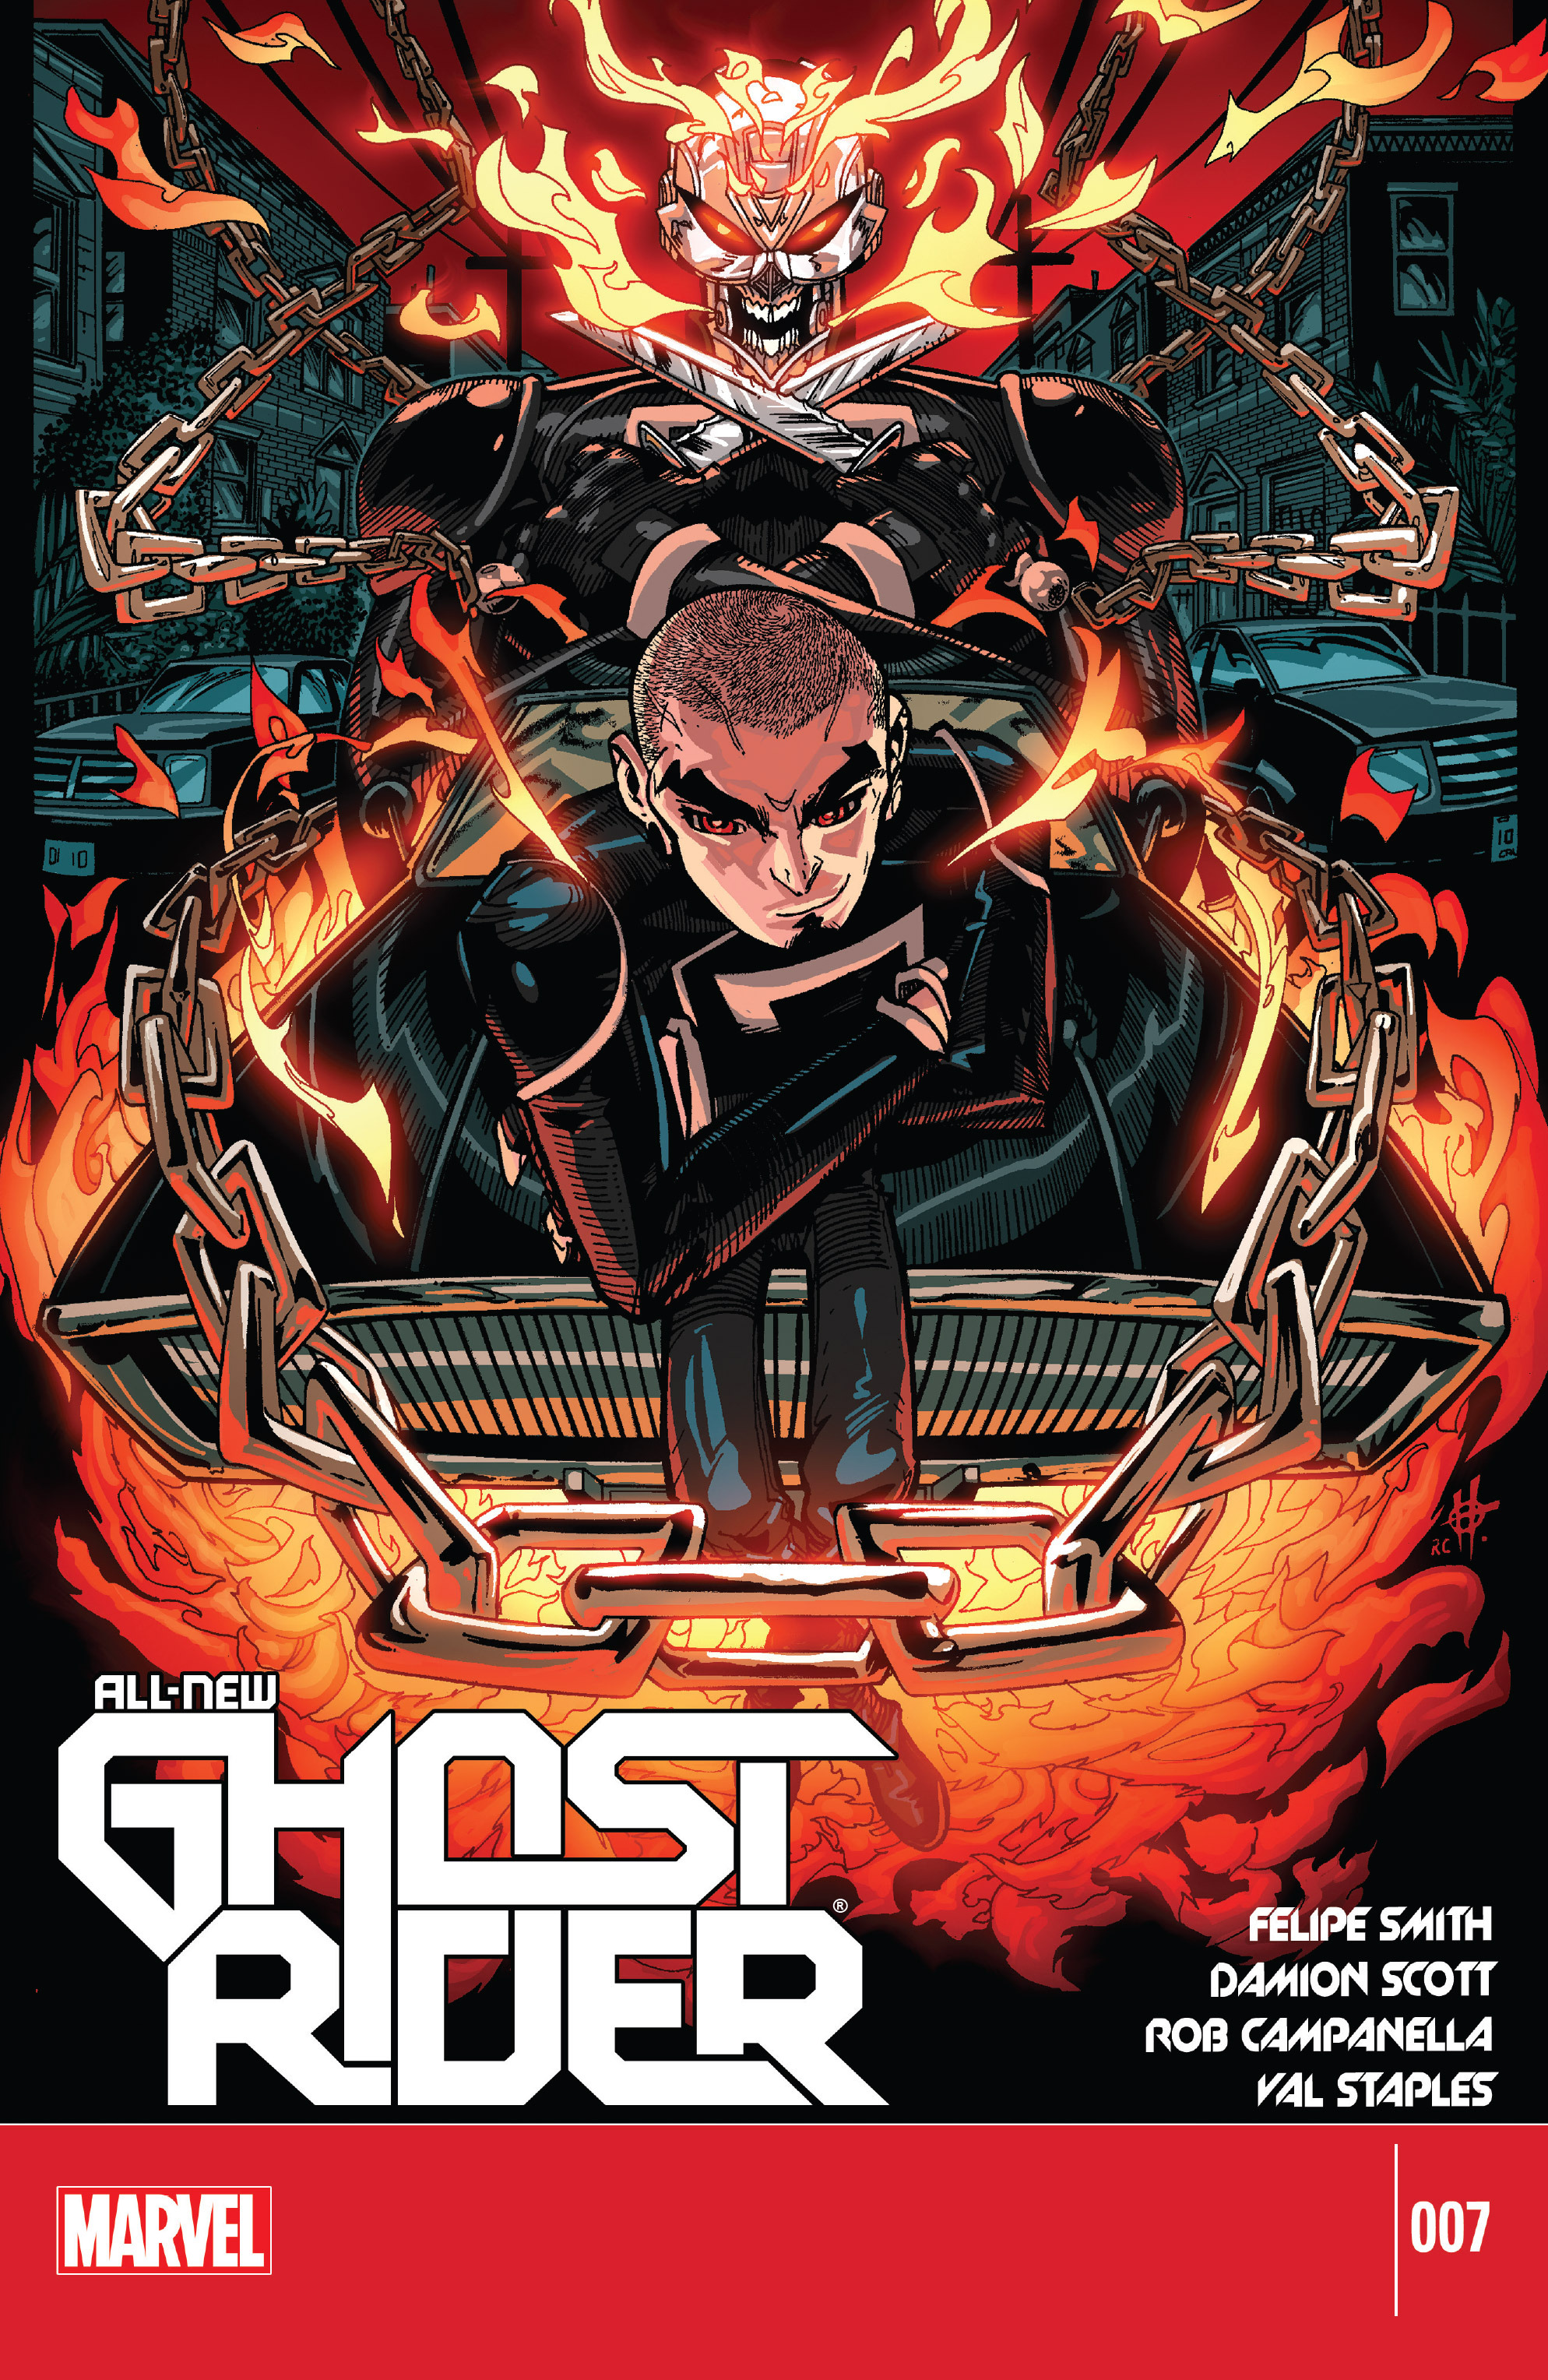 All New Ghost Rider Issue 7 | Read All New Ghost Rider Issue 7 comic online  in high quality. Read Full Comic online for free - Read comics online in  high quality .